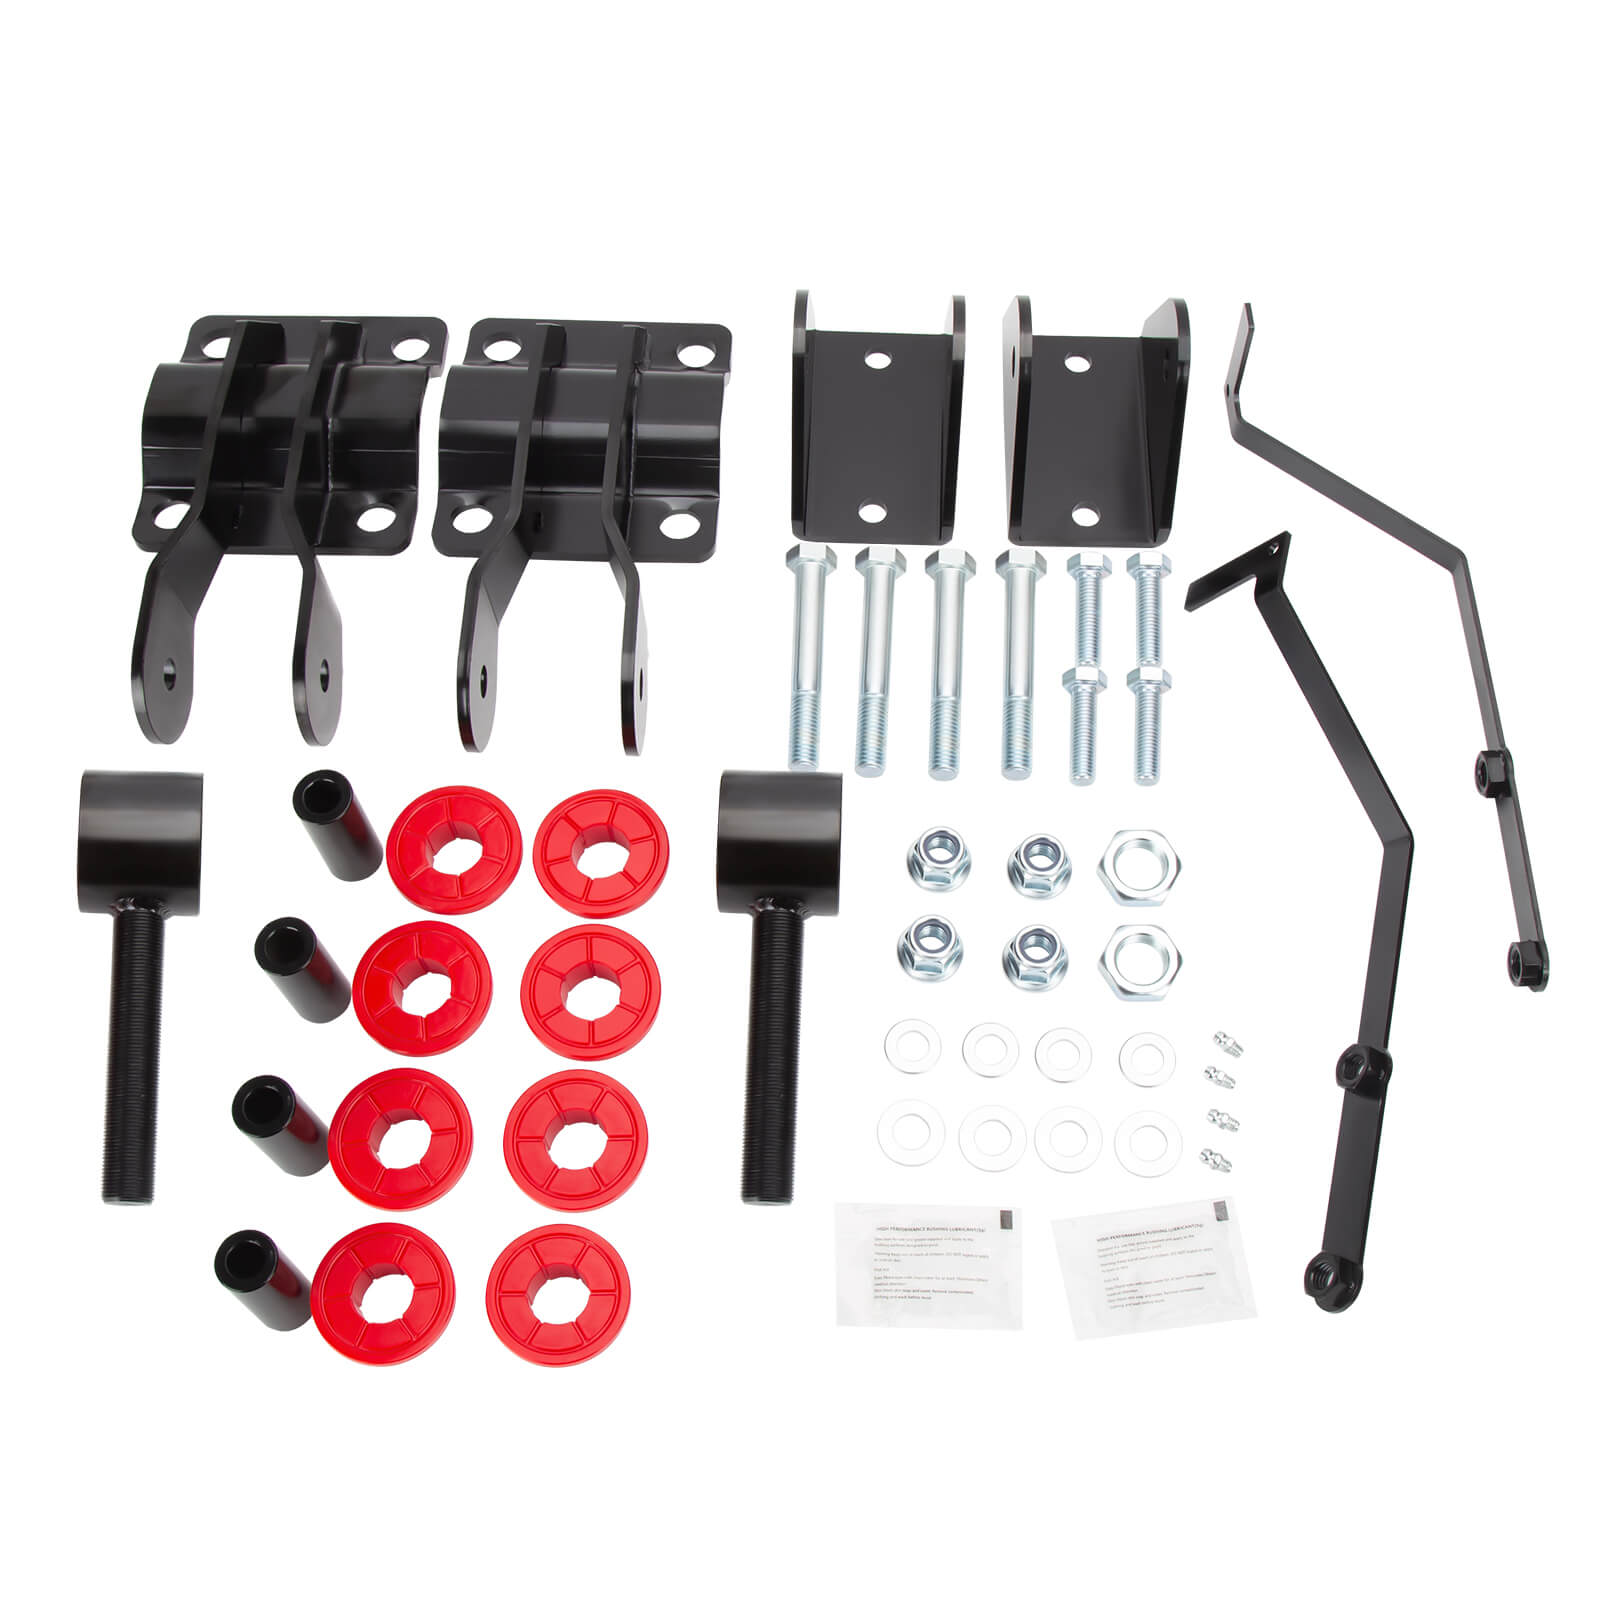 KSP Rear Traction Bar 2009-2020 Ford F150 5-7 inches Lift, Suspension Leaf Spring Lift Bar Stabilizing Kits